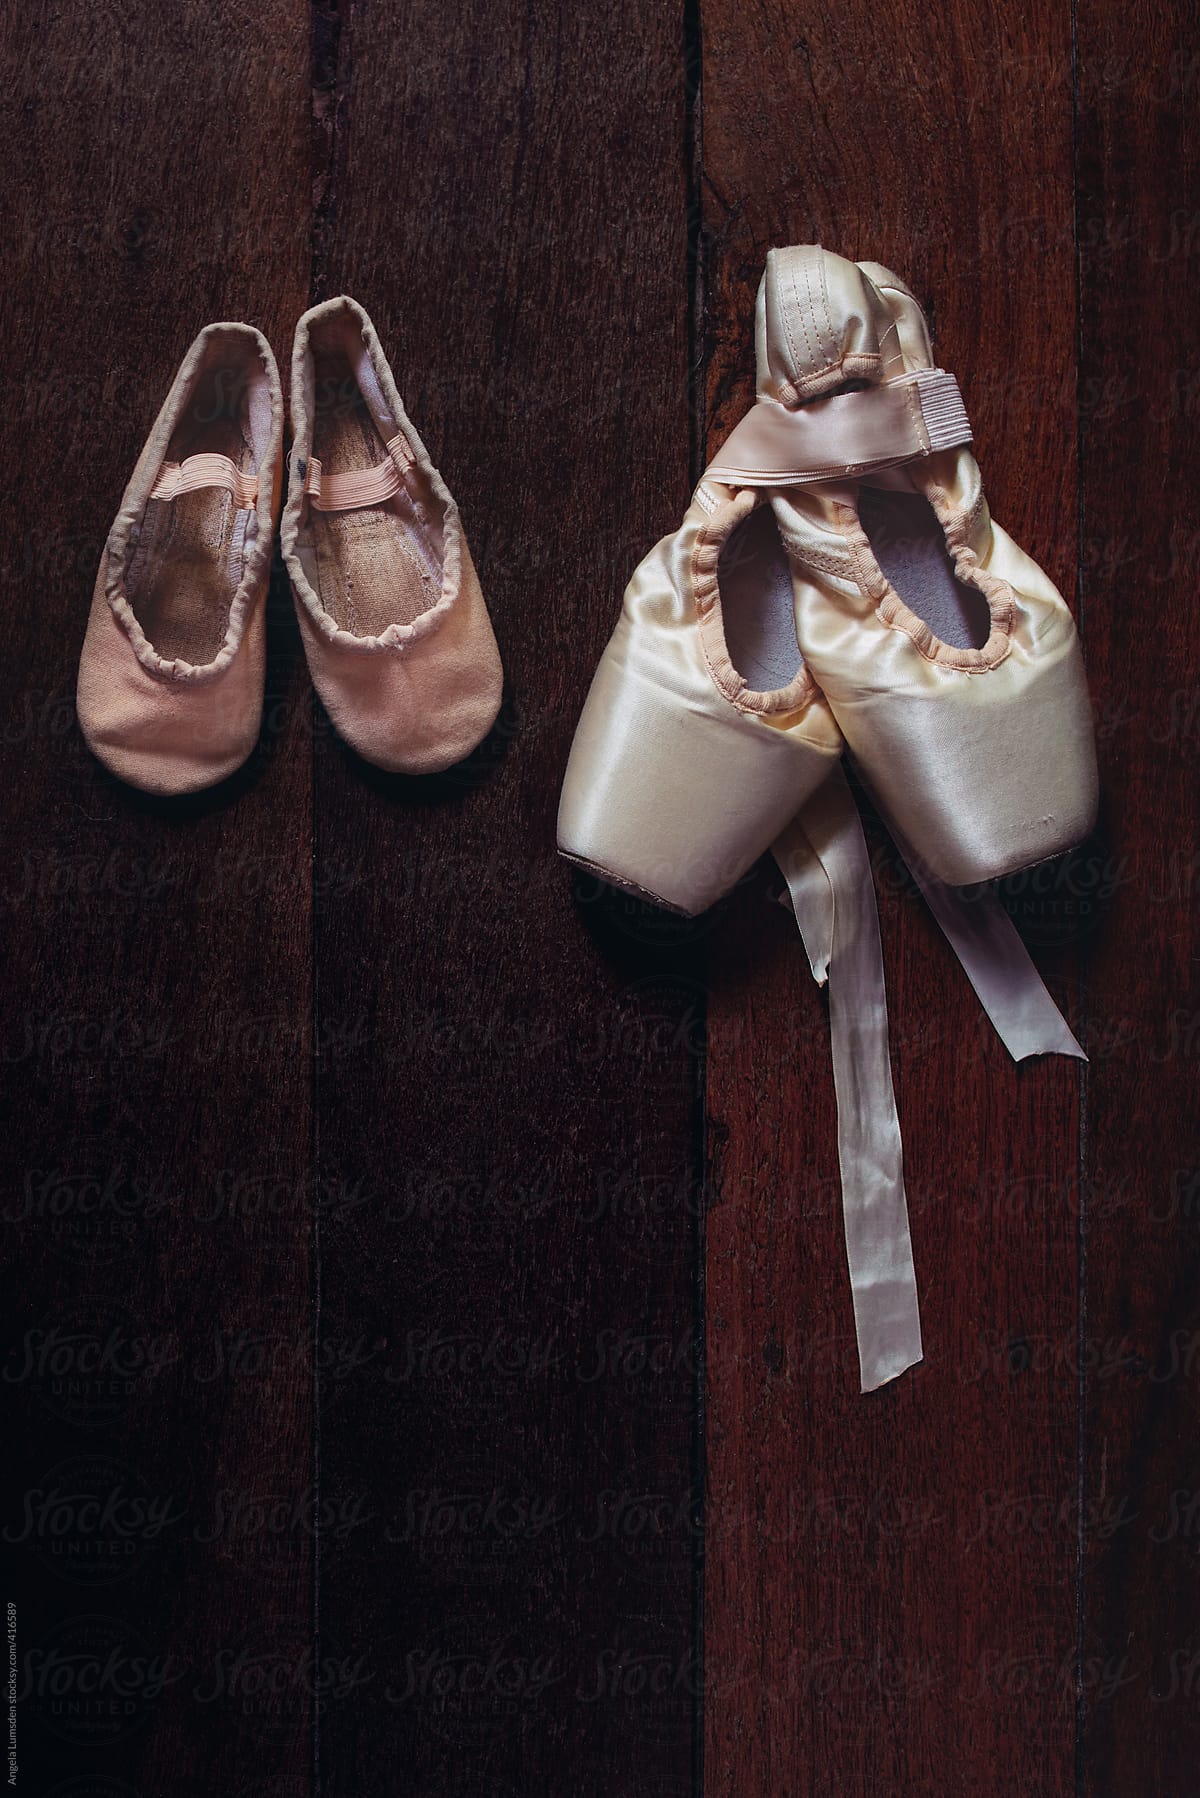 A small child's old ballet shoes beside a pair of pointe shoes on a dark wood background